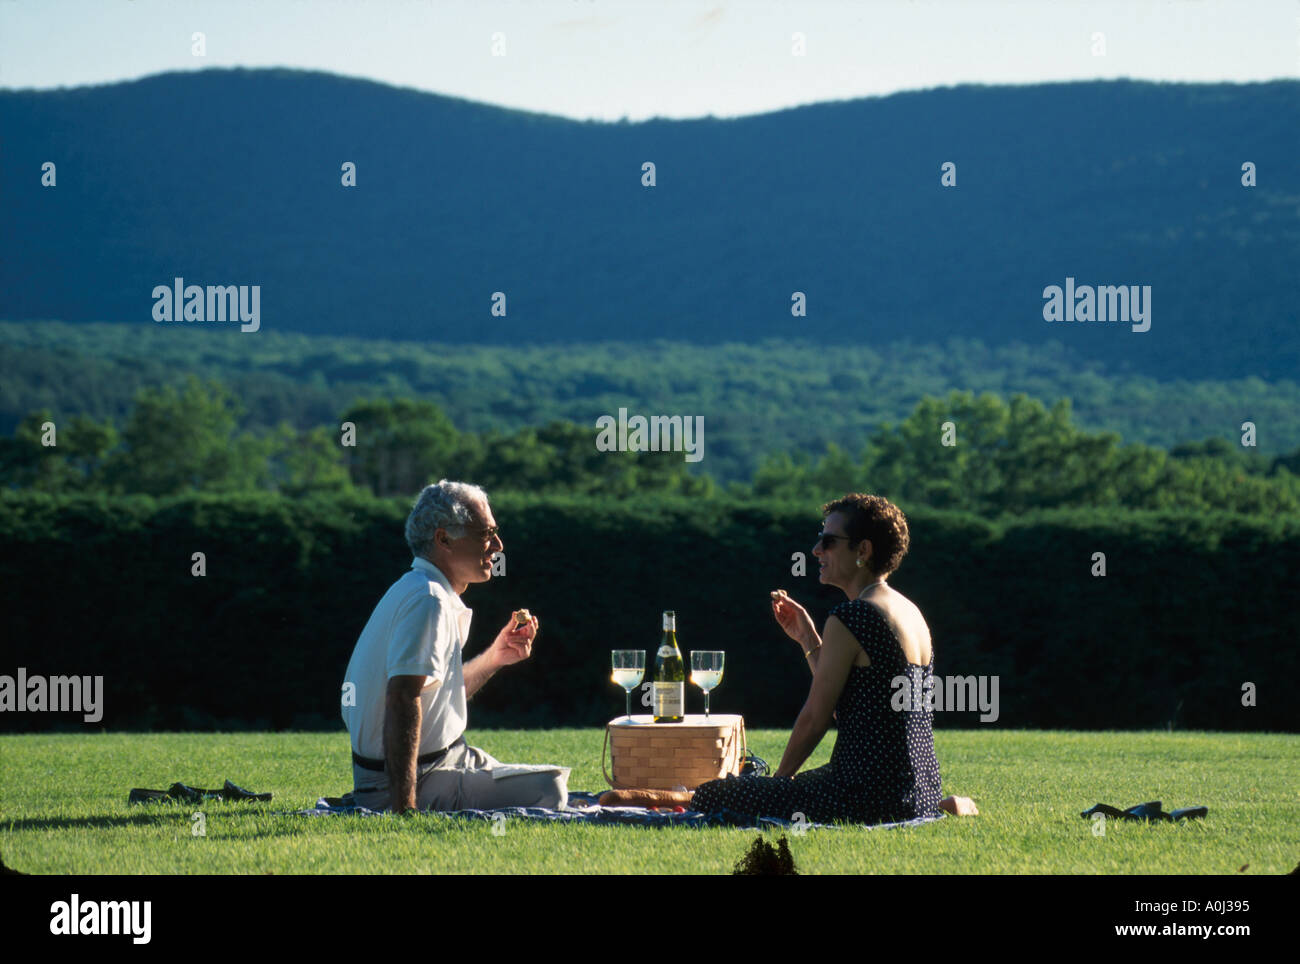 Massachusetts,New England,The Berkshires Tanglewood couple,adult adults man men male,woman women female lady,picnic on lawn before evening concert,liv Stock Photo